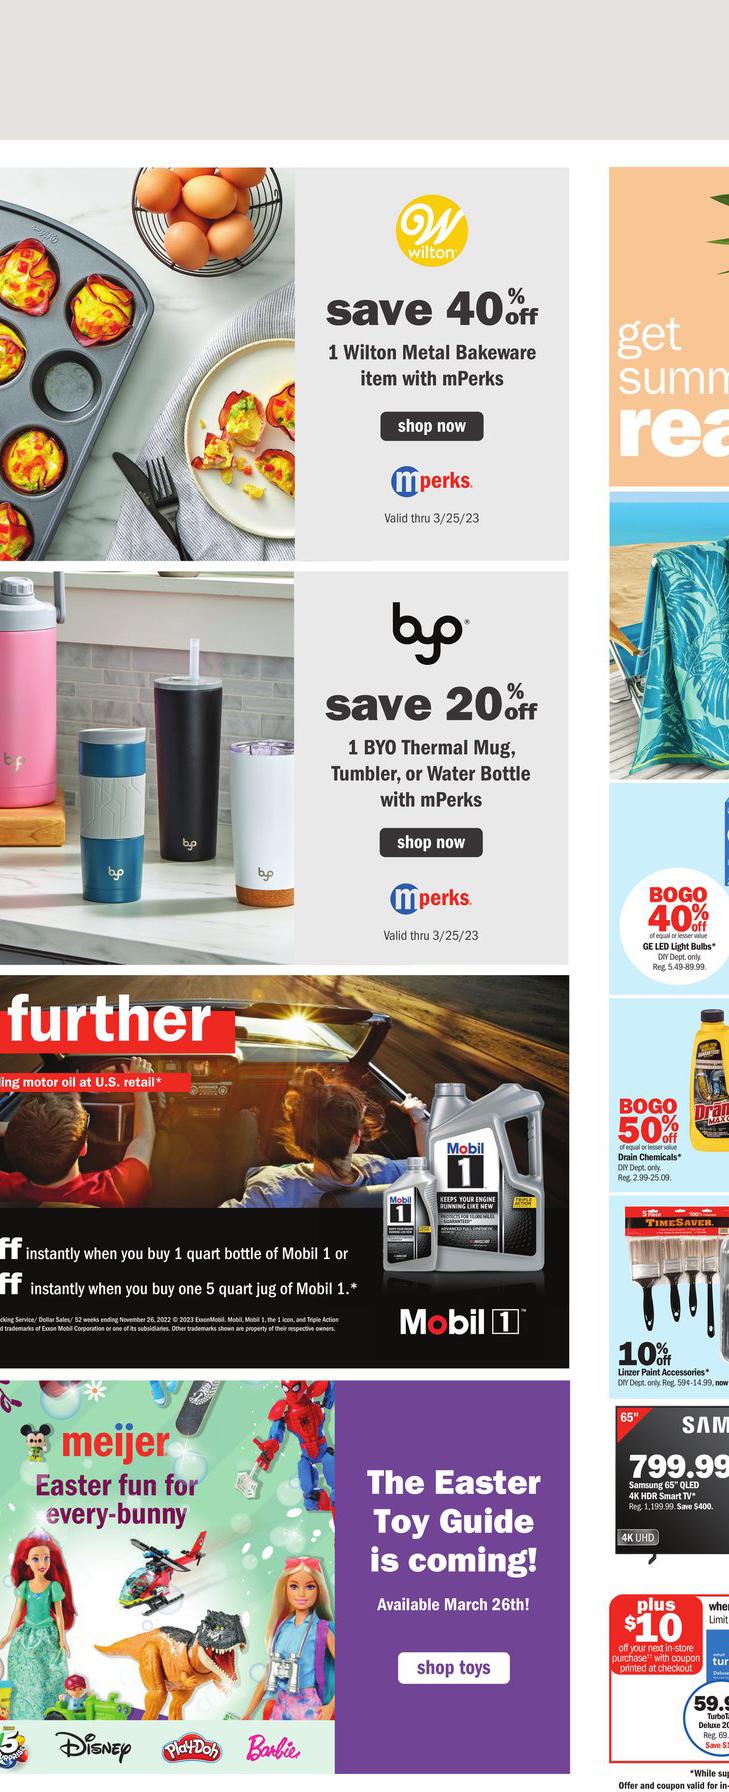 19.03.2023 Meijer ad 22. page